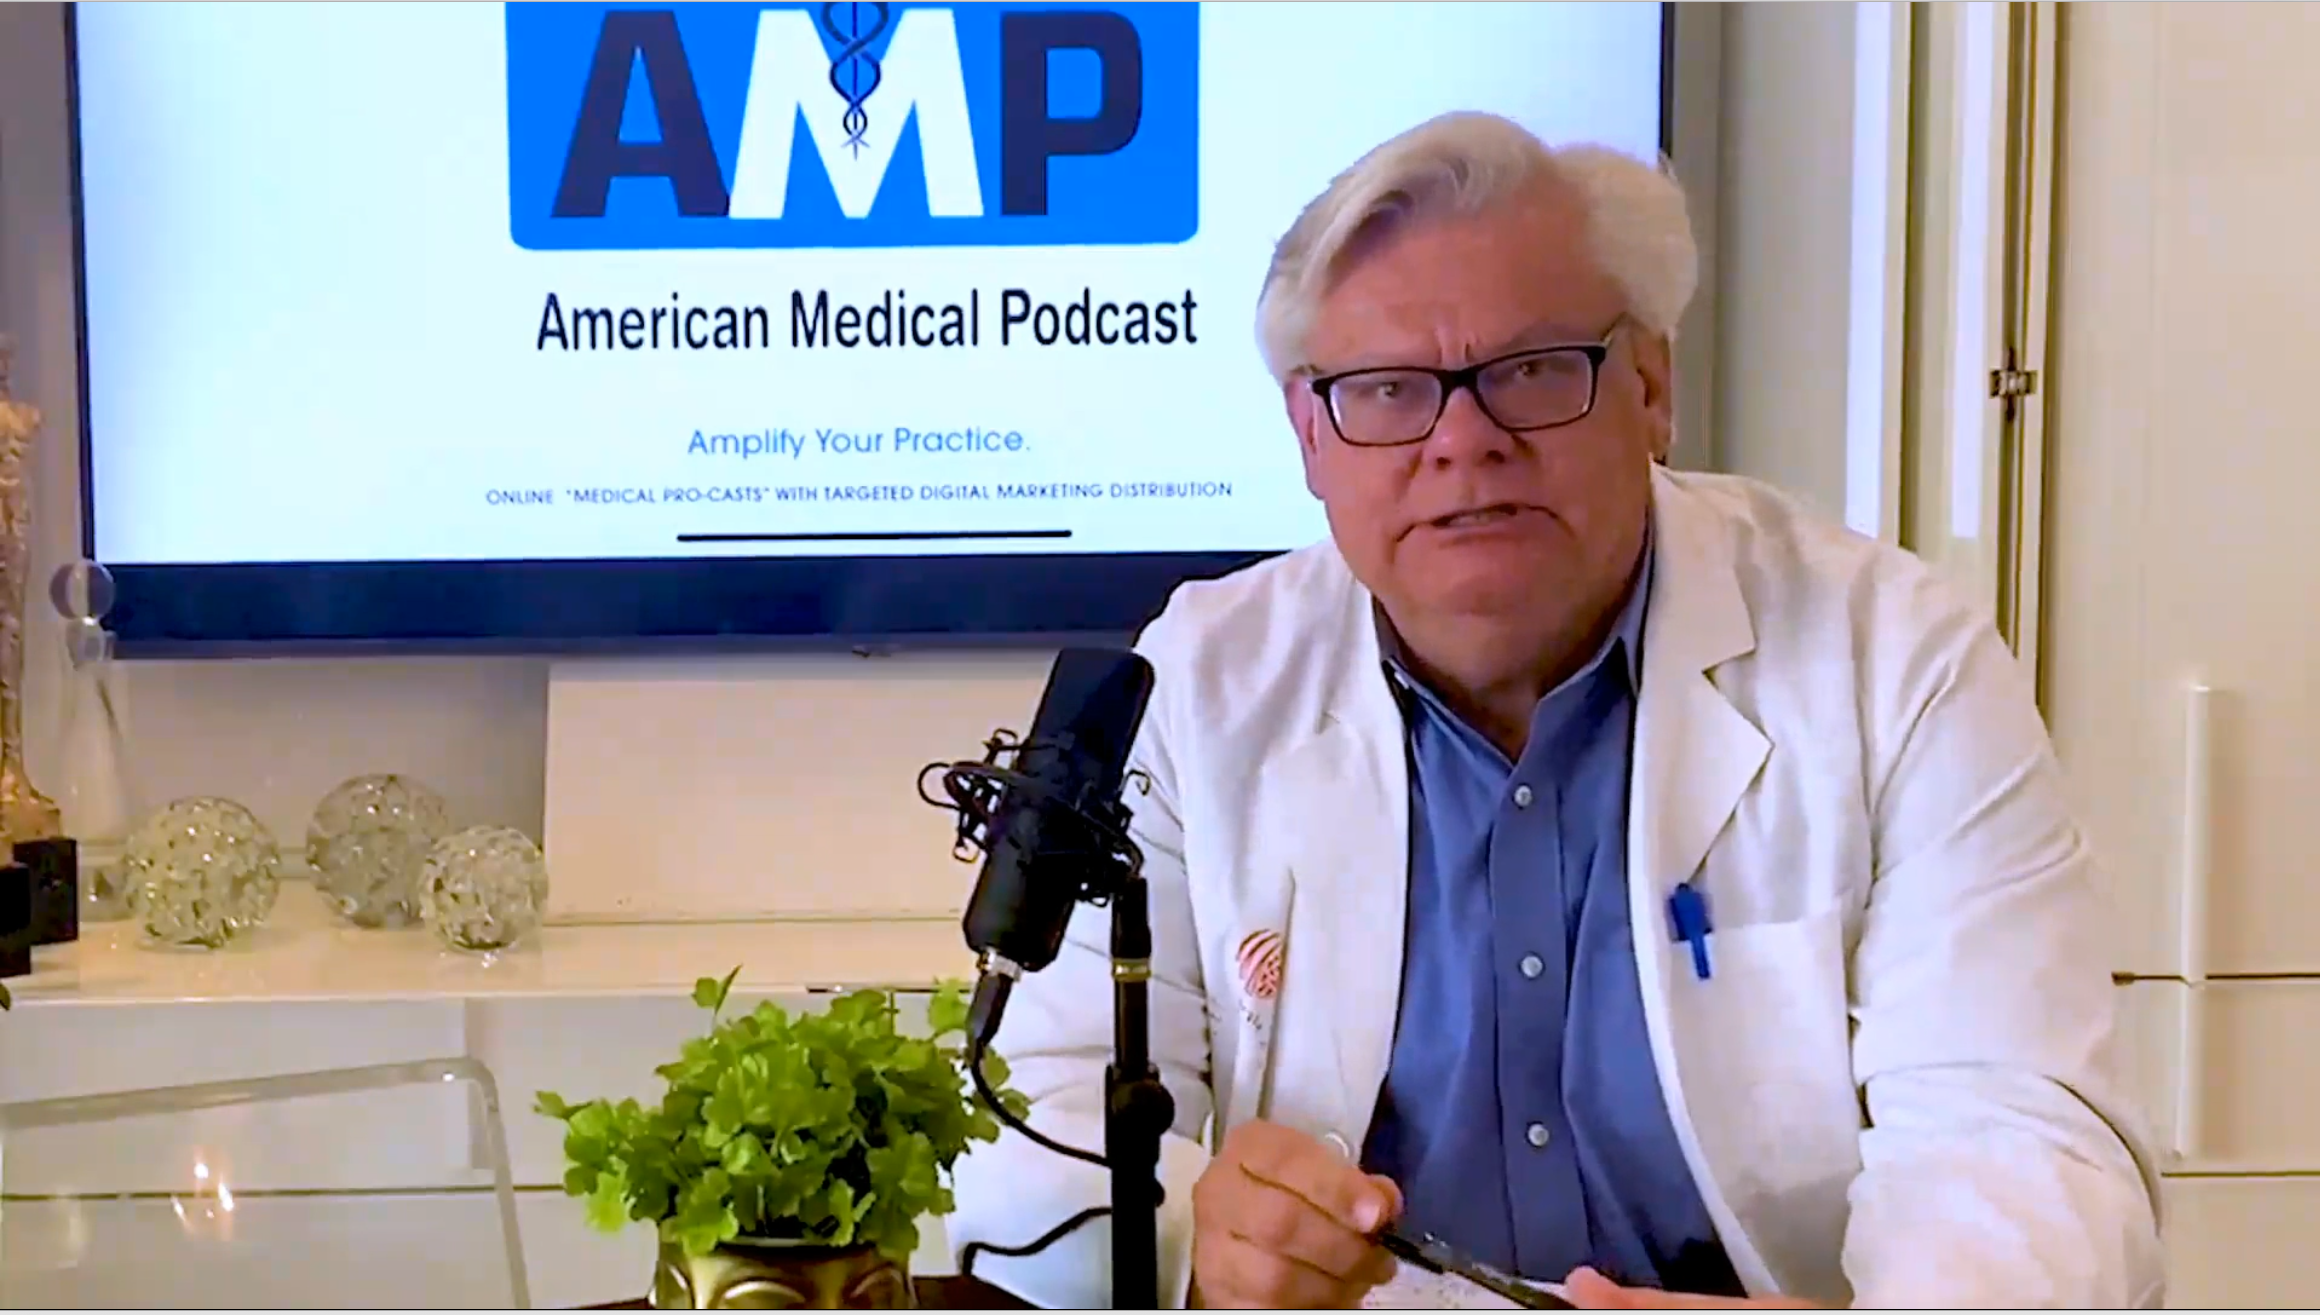 Mississippi Hair Restoration Announces Dr. Michael Kanosky Named New Medical Director for American Medical Podcast and Mississippi Affiliate